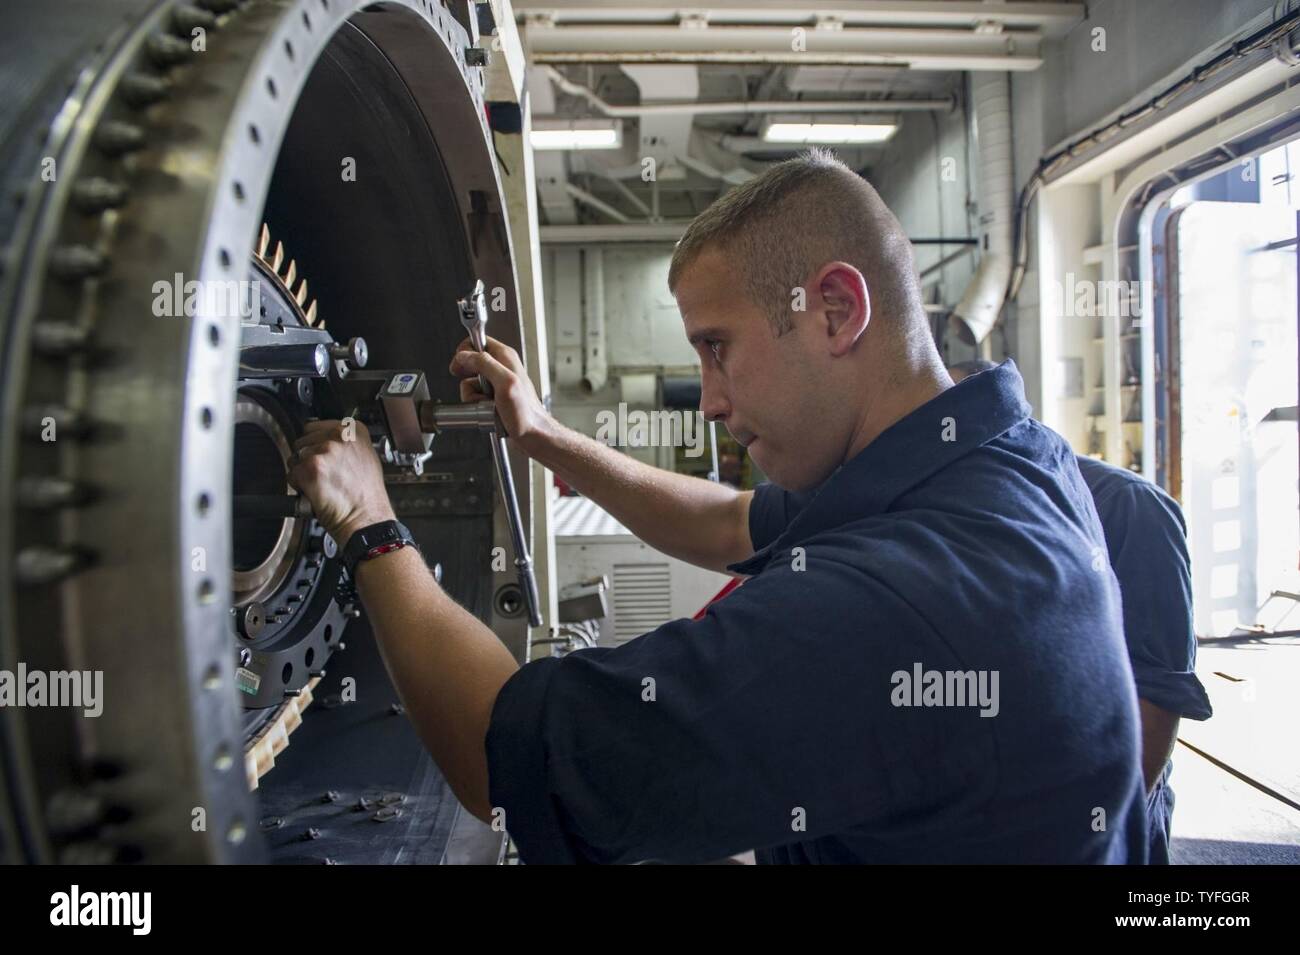 GULF (Nov 6, 2016) Seaman Jose Torrech, from Puerto Rico, conducts maintenance on the high-pressure turbine on a jet engine in the jet shop of the aircraft carrier USS Dwight D. Eisenhower (CVN 69) (Ike). Torrech serves aboard Ike as an aviation machinist’s mate and is responsible for inspecting, troubleshooting, fabricating and maintaining jet engines. Ike and its Carrier Strike Group are deployed in support of Operation Inherent Resolve, maritime security operations and theater security cooperation efforts in the U.S. 5th Fleet area of operations. Stock Photo